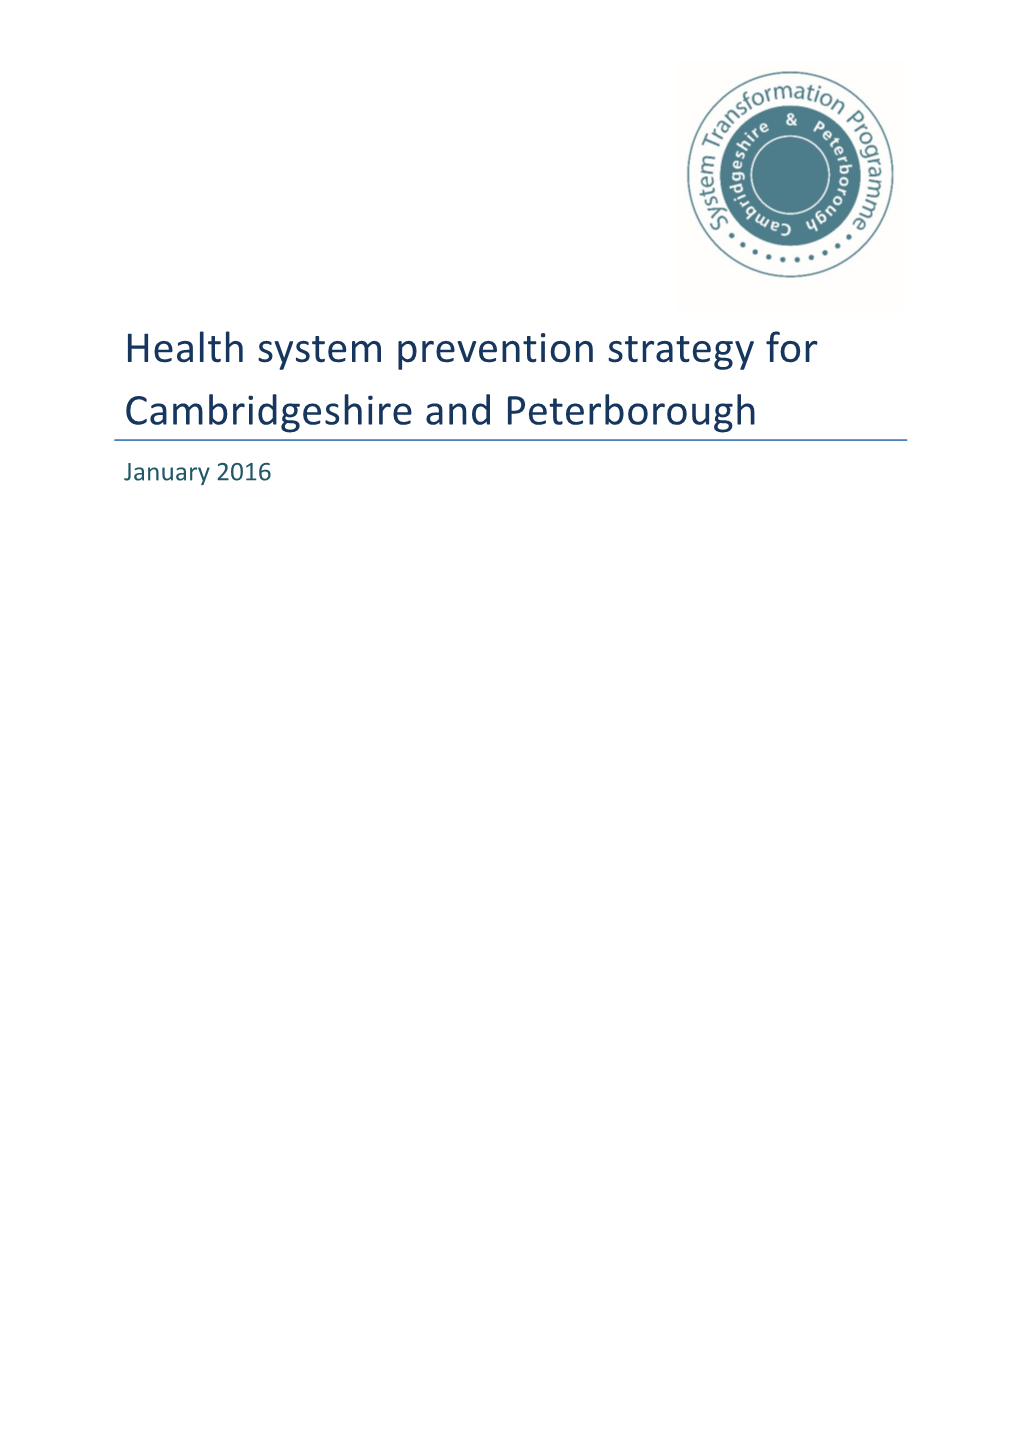 Health System Prevention Strategy for Cambridgeshire and Peterborough